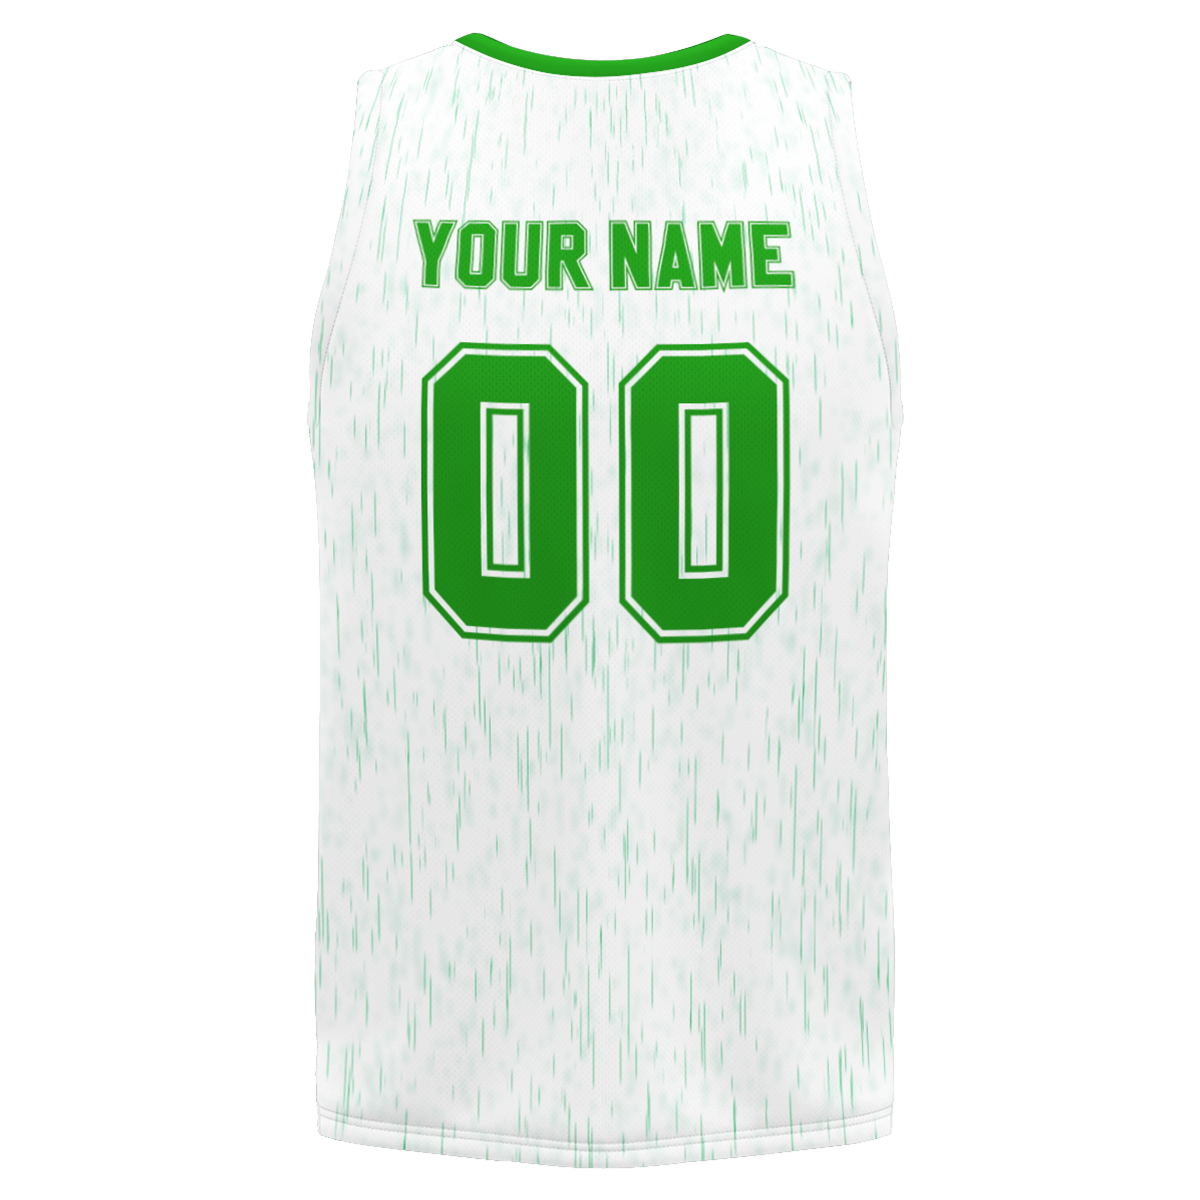 wholesale-customized-team-logo-blank-polyester-breathable-mesh-sublimation-team-competition-basketball-uniform-set-at-cj-pod-6